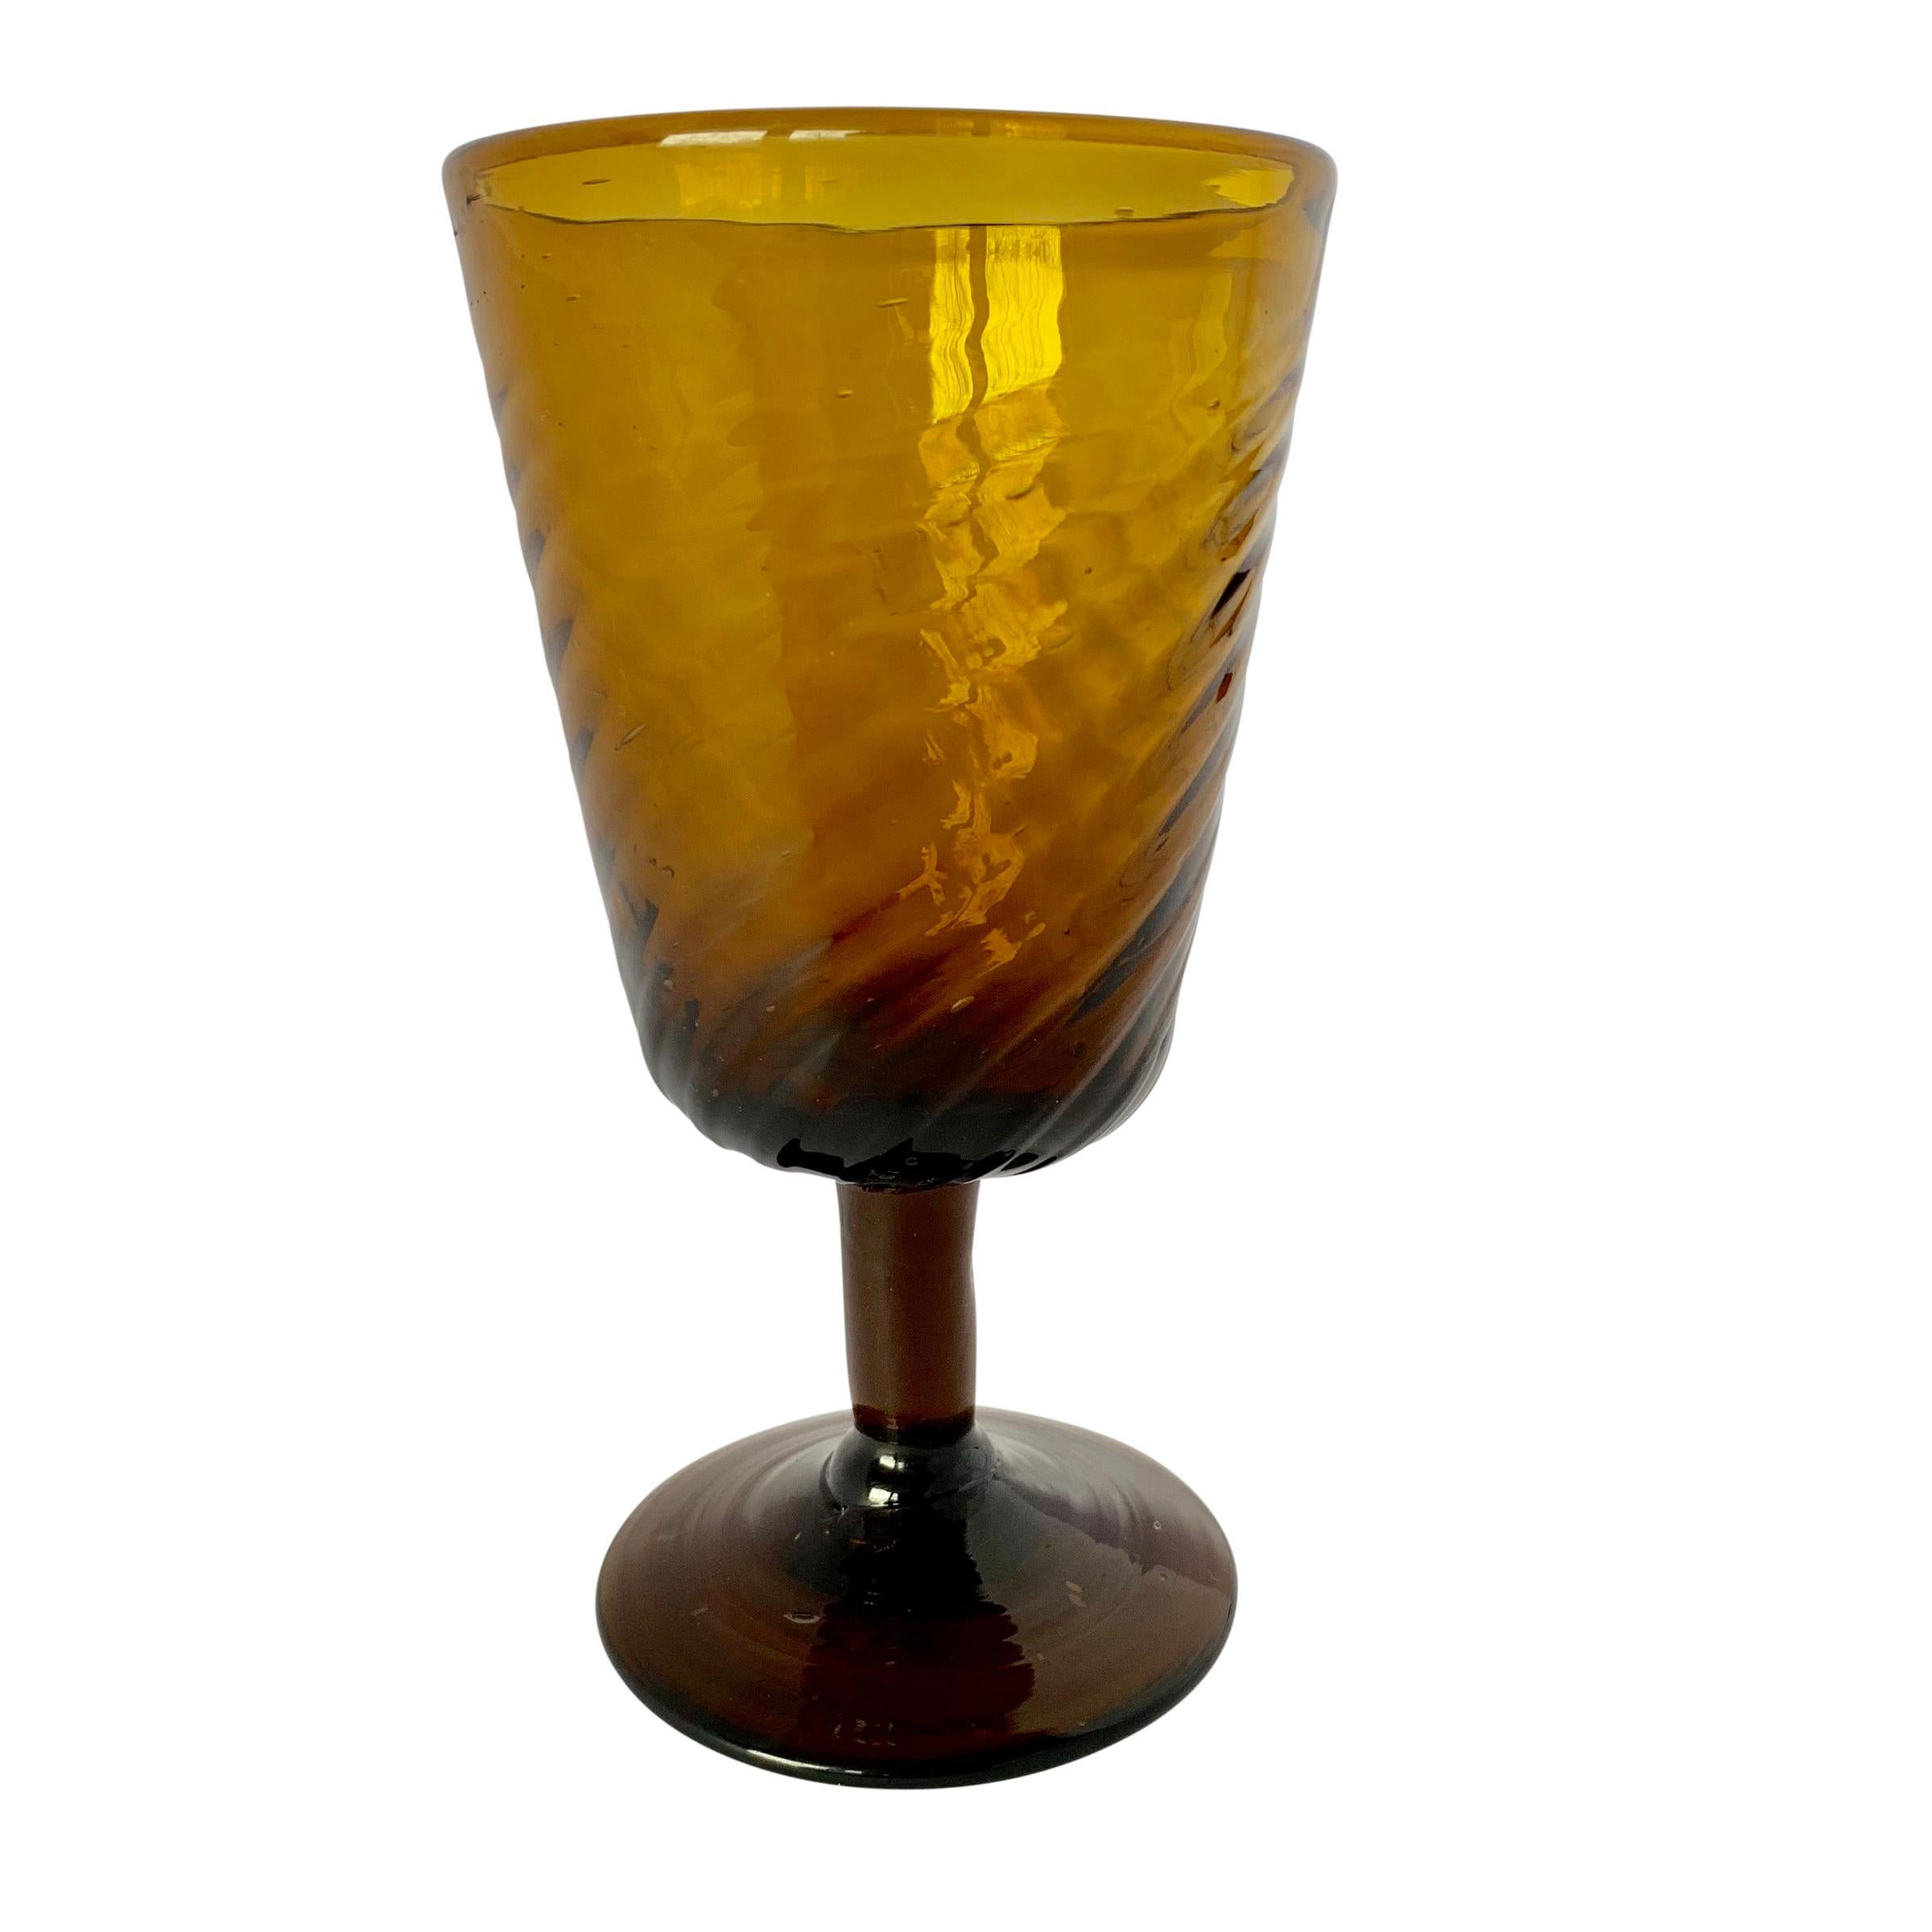 A gorgeous set of twelve mid-20th century Italian hand-blown amber colored wine glasses with a beautiful twist patterned goblet.